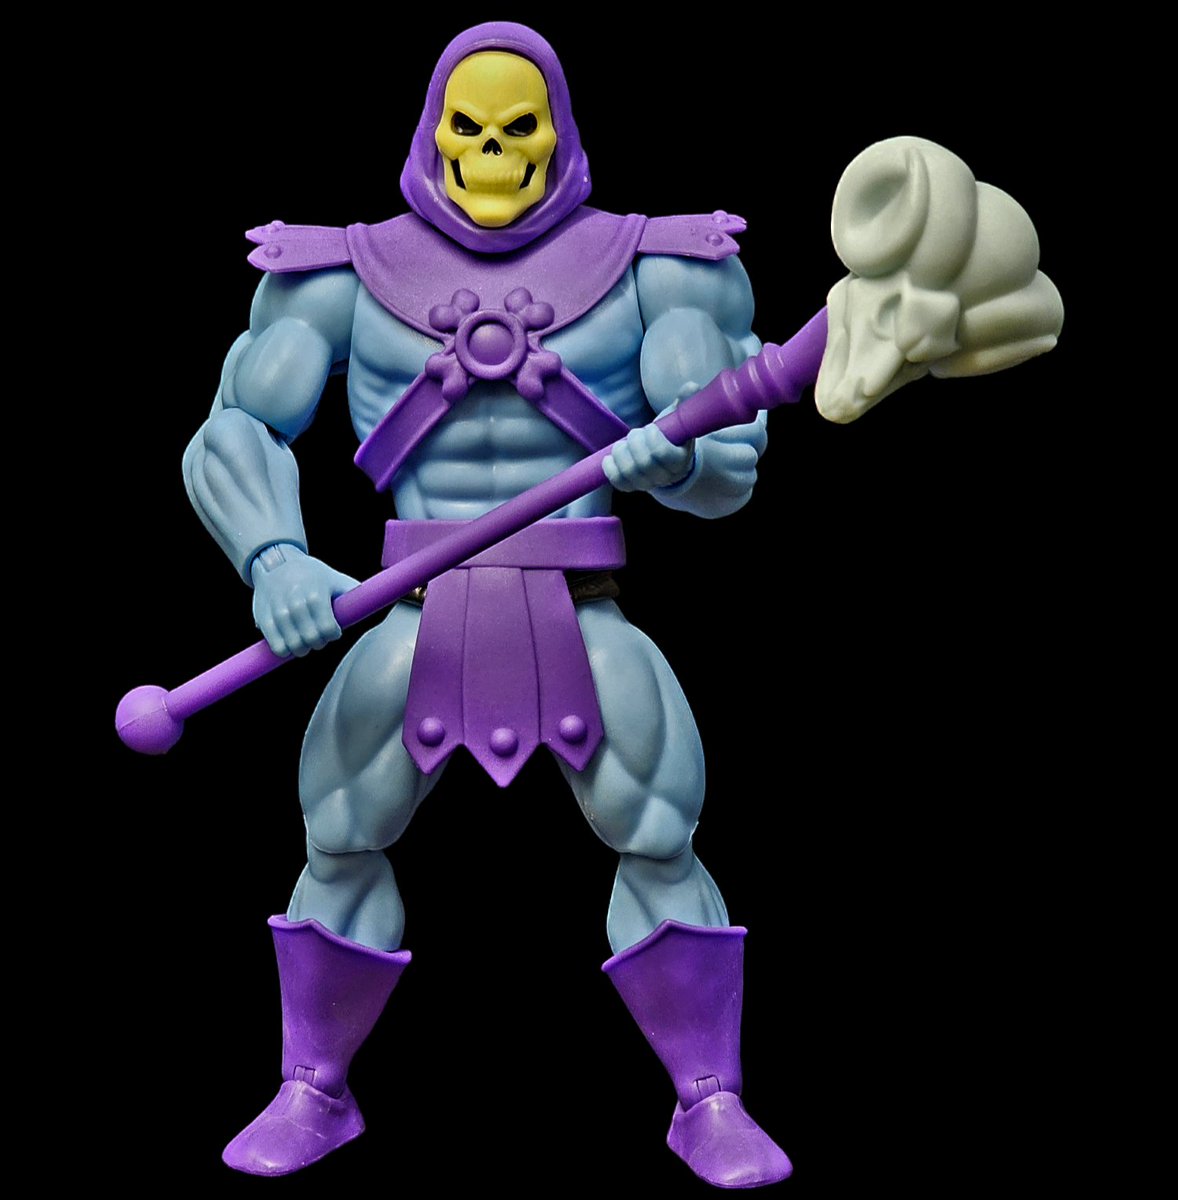 I've been too busy to take pics, so here is Skeletor at a slightly different angle!